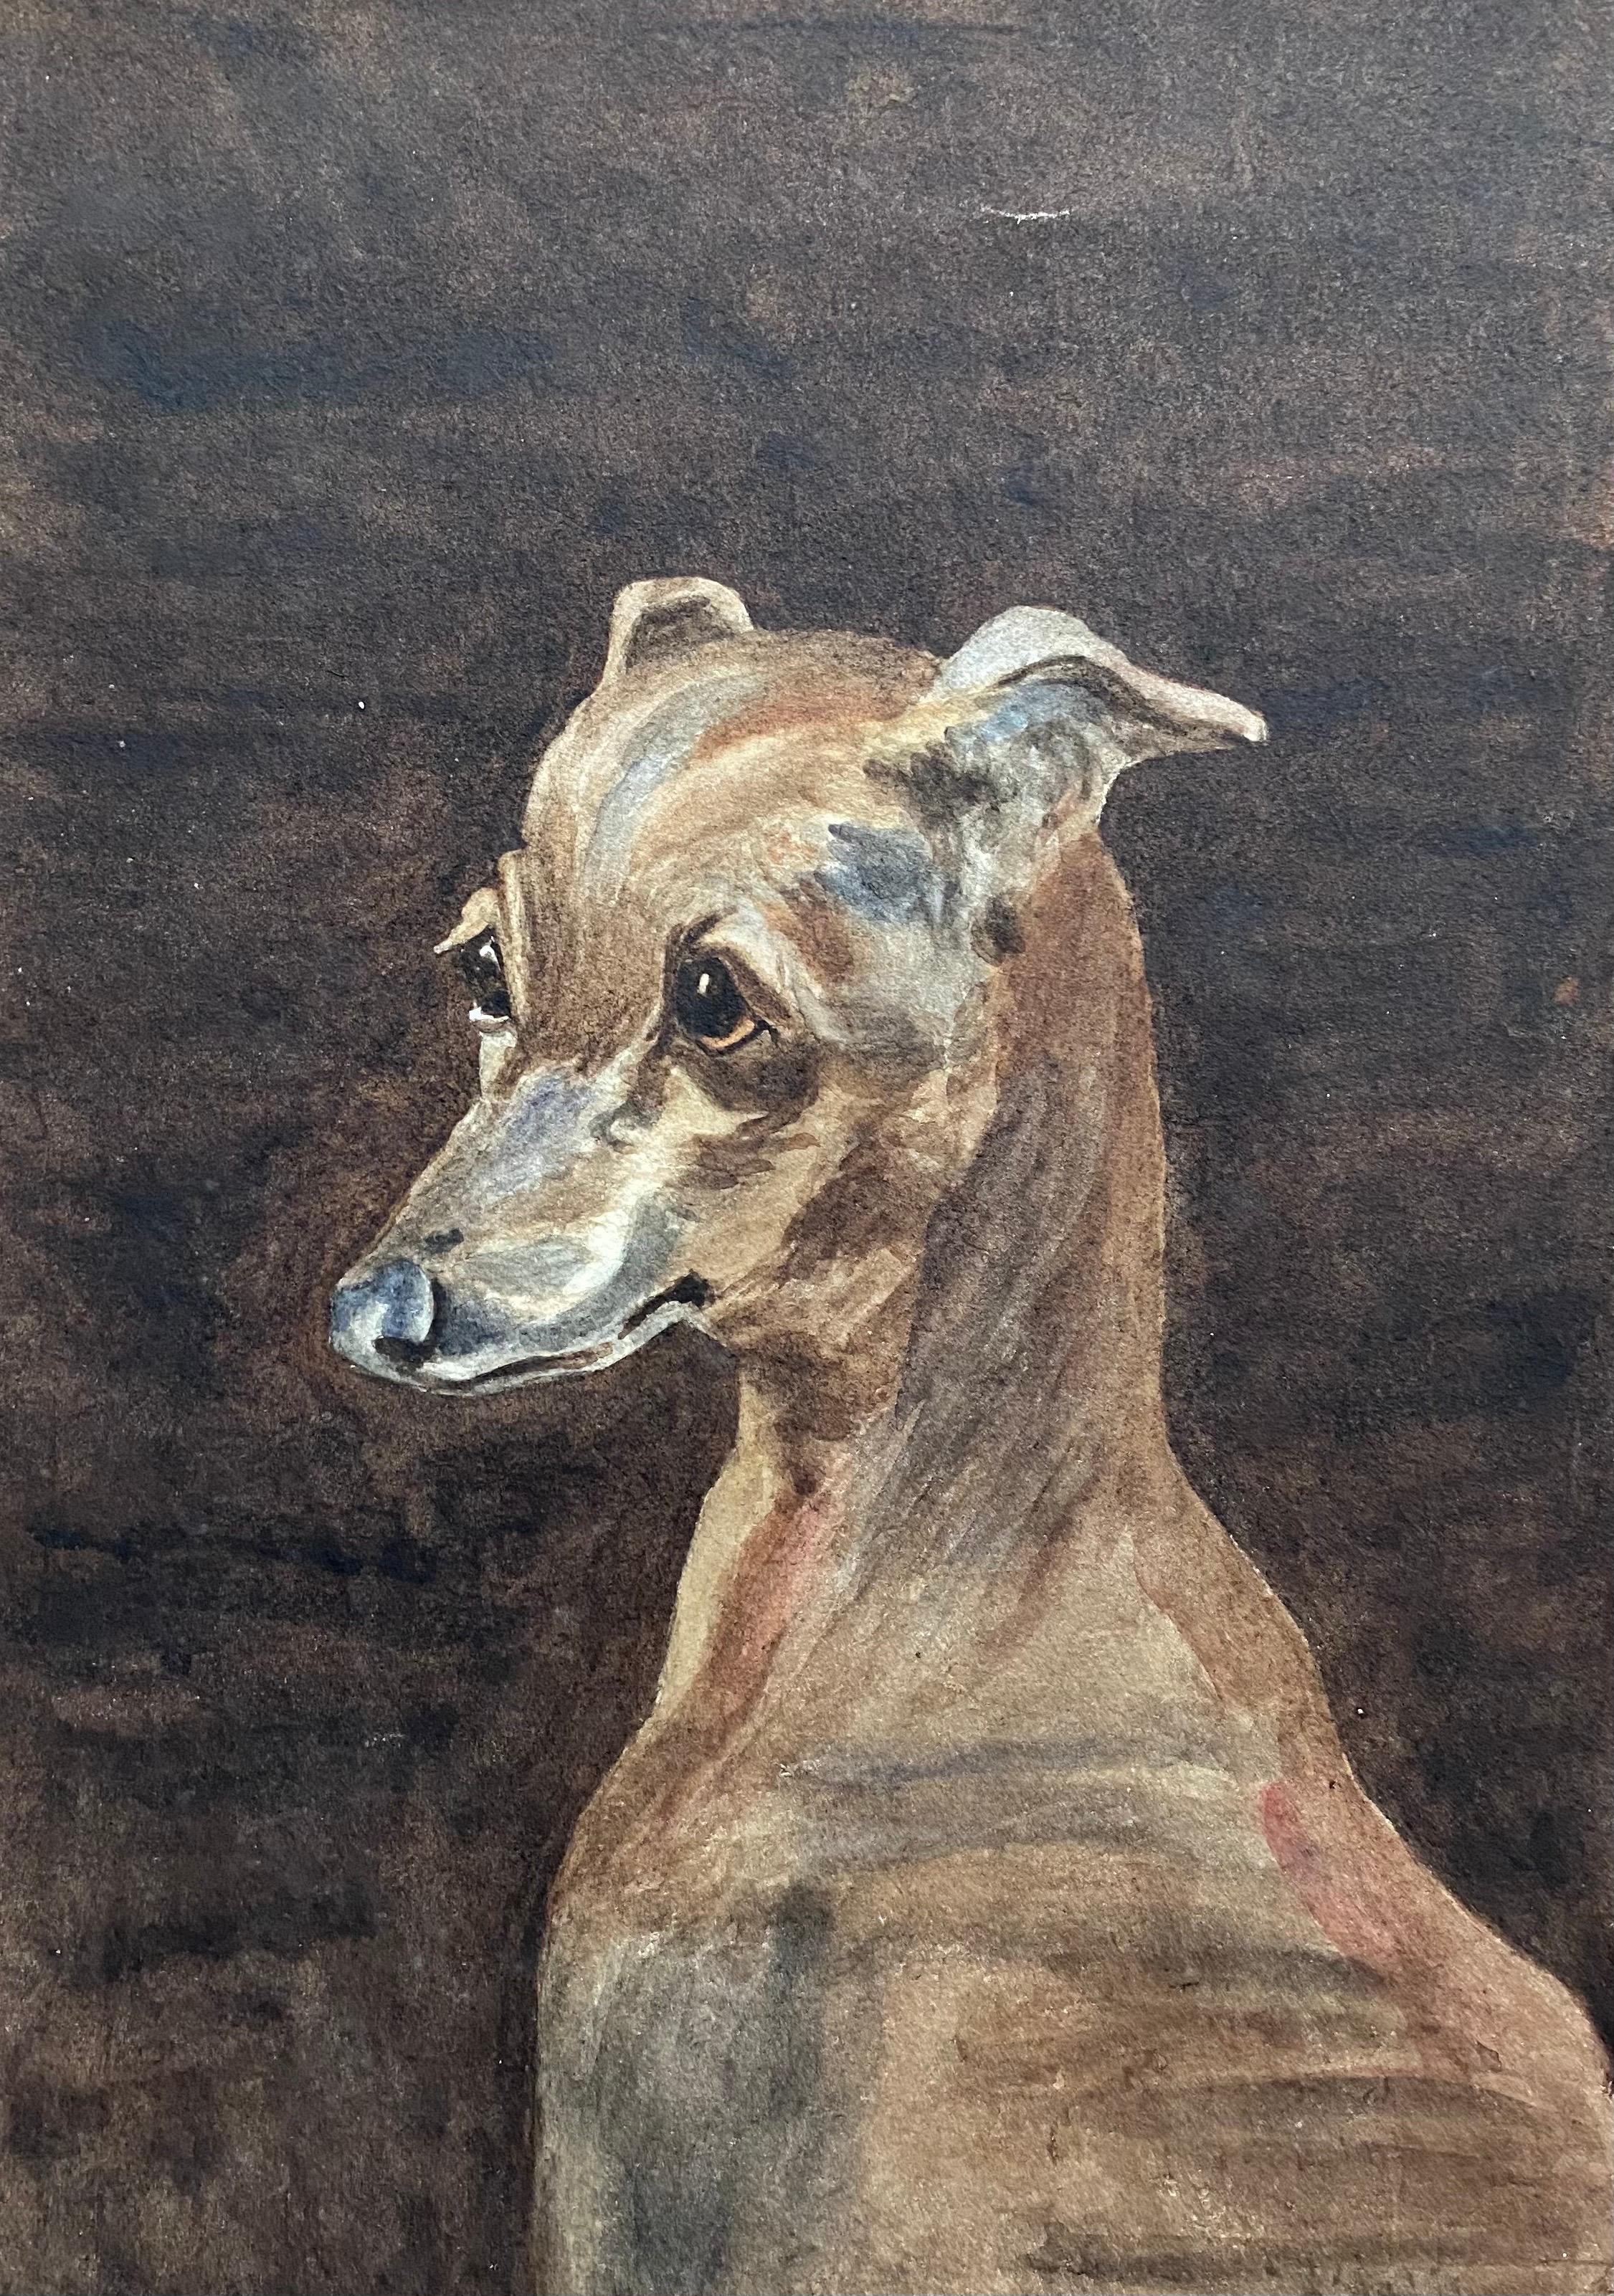 L. J. Wortley Animal Art - Fine 1900's British Dog Painting Portrait of a Whippet, Painted in Rome